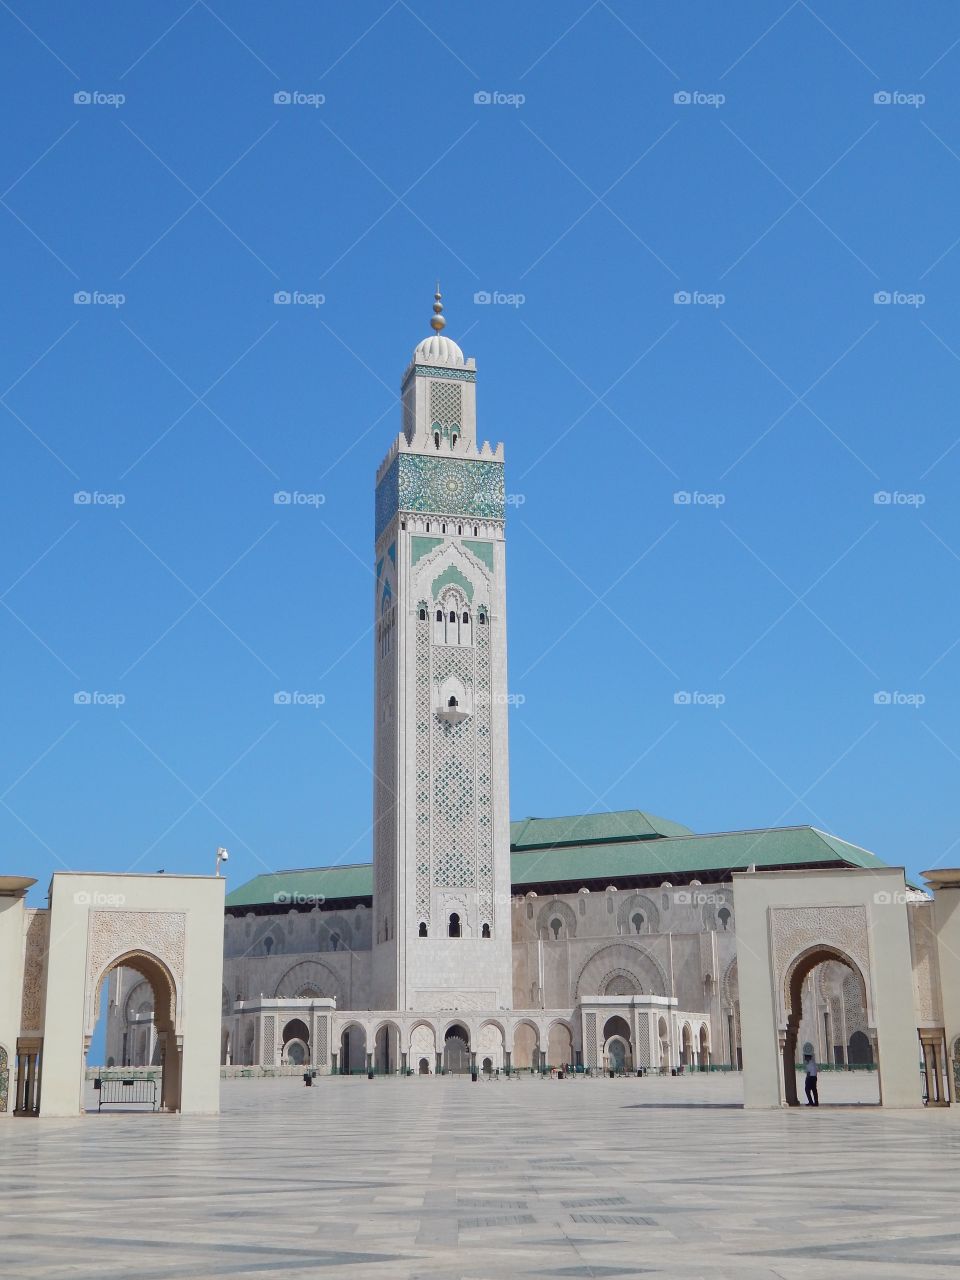 One of the largest mosques in Morocco 